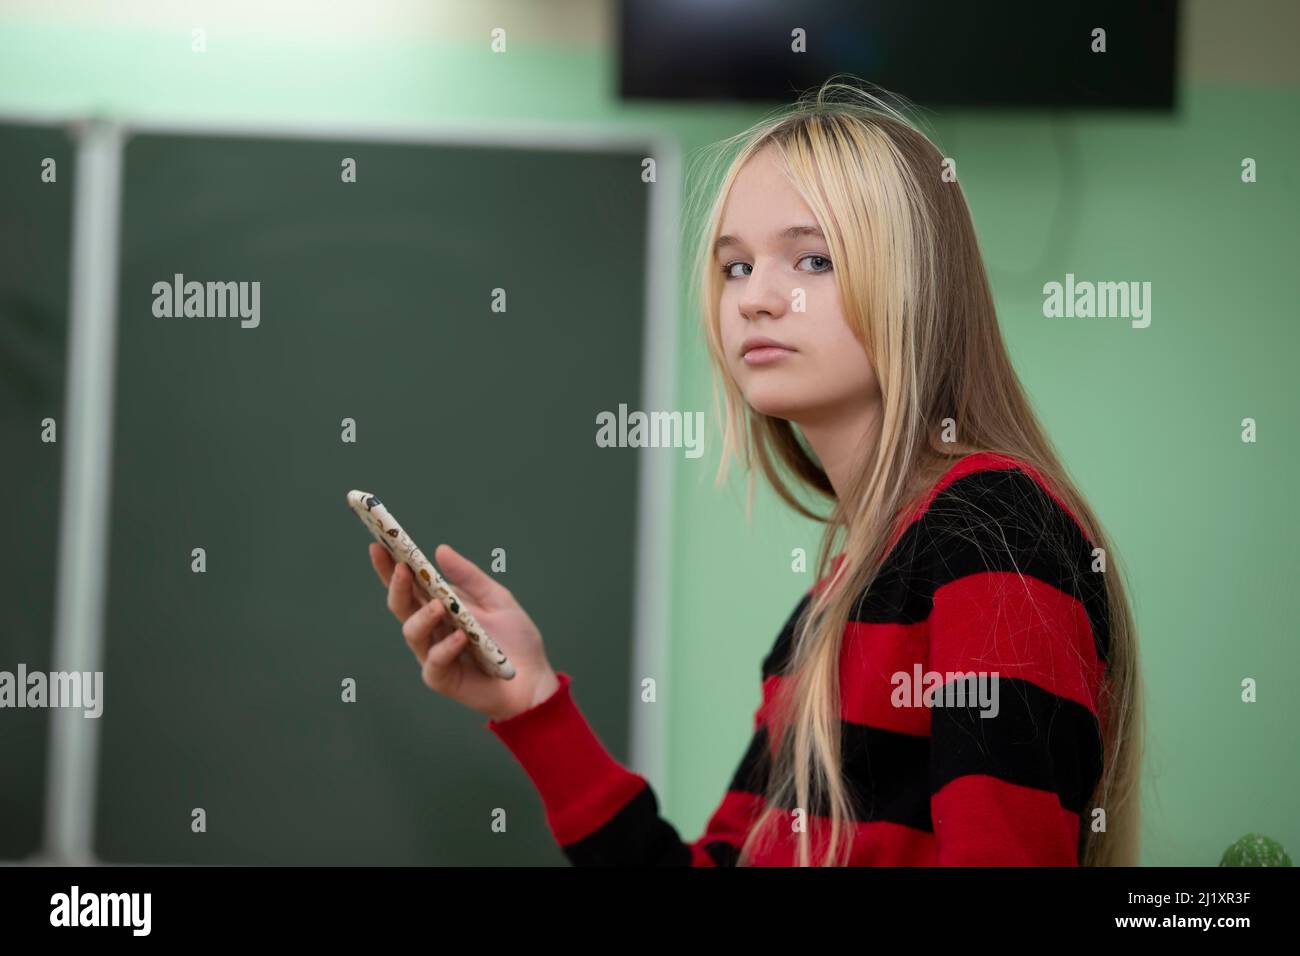 Teenager of senior school age. A teenage girl stands in front of a blackboard. Stock Photo